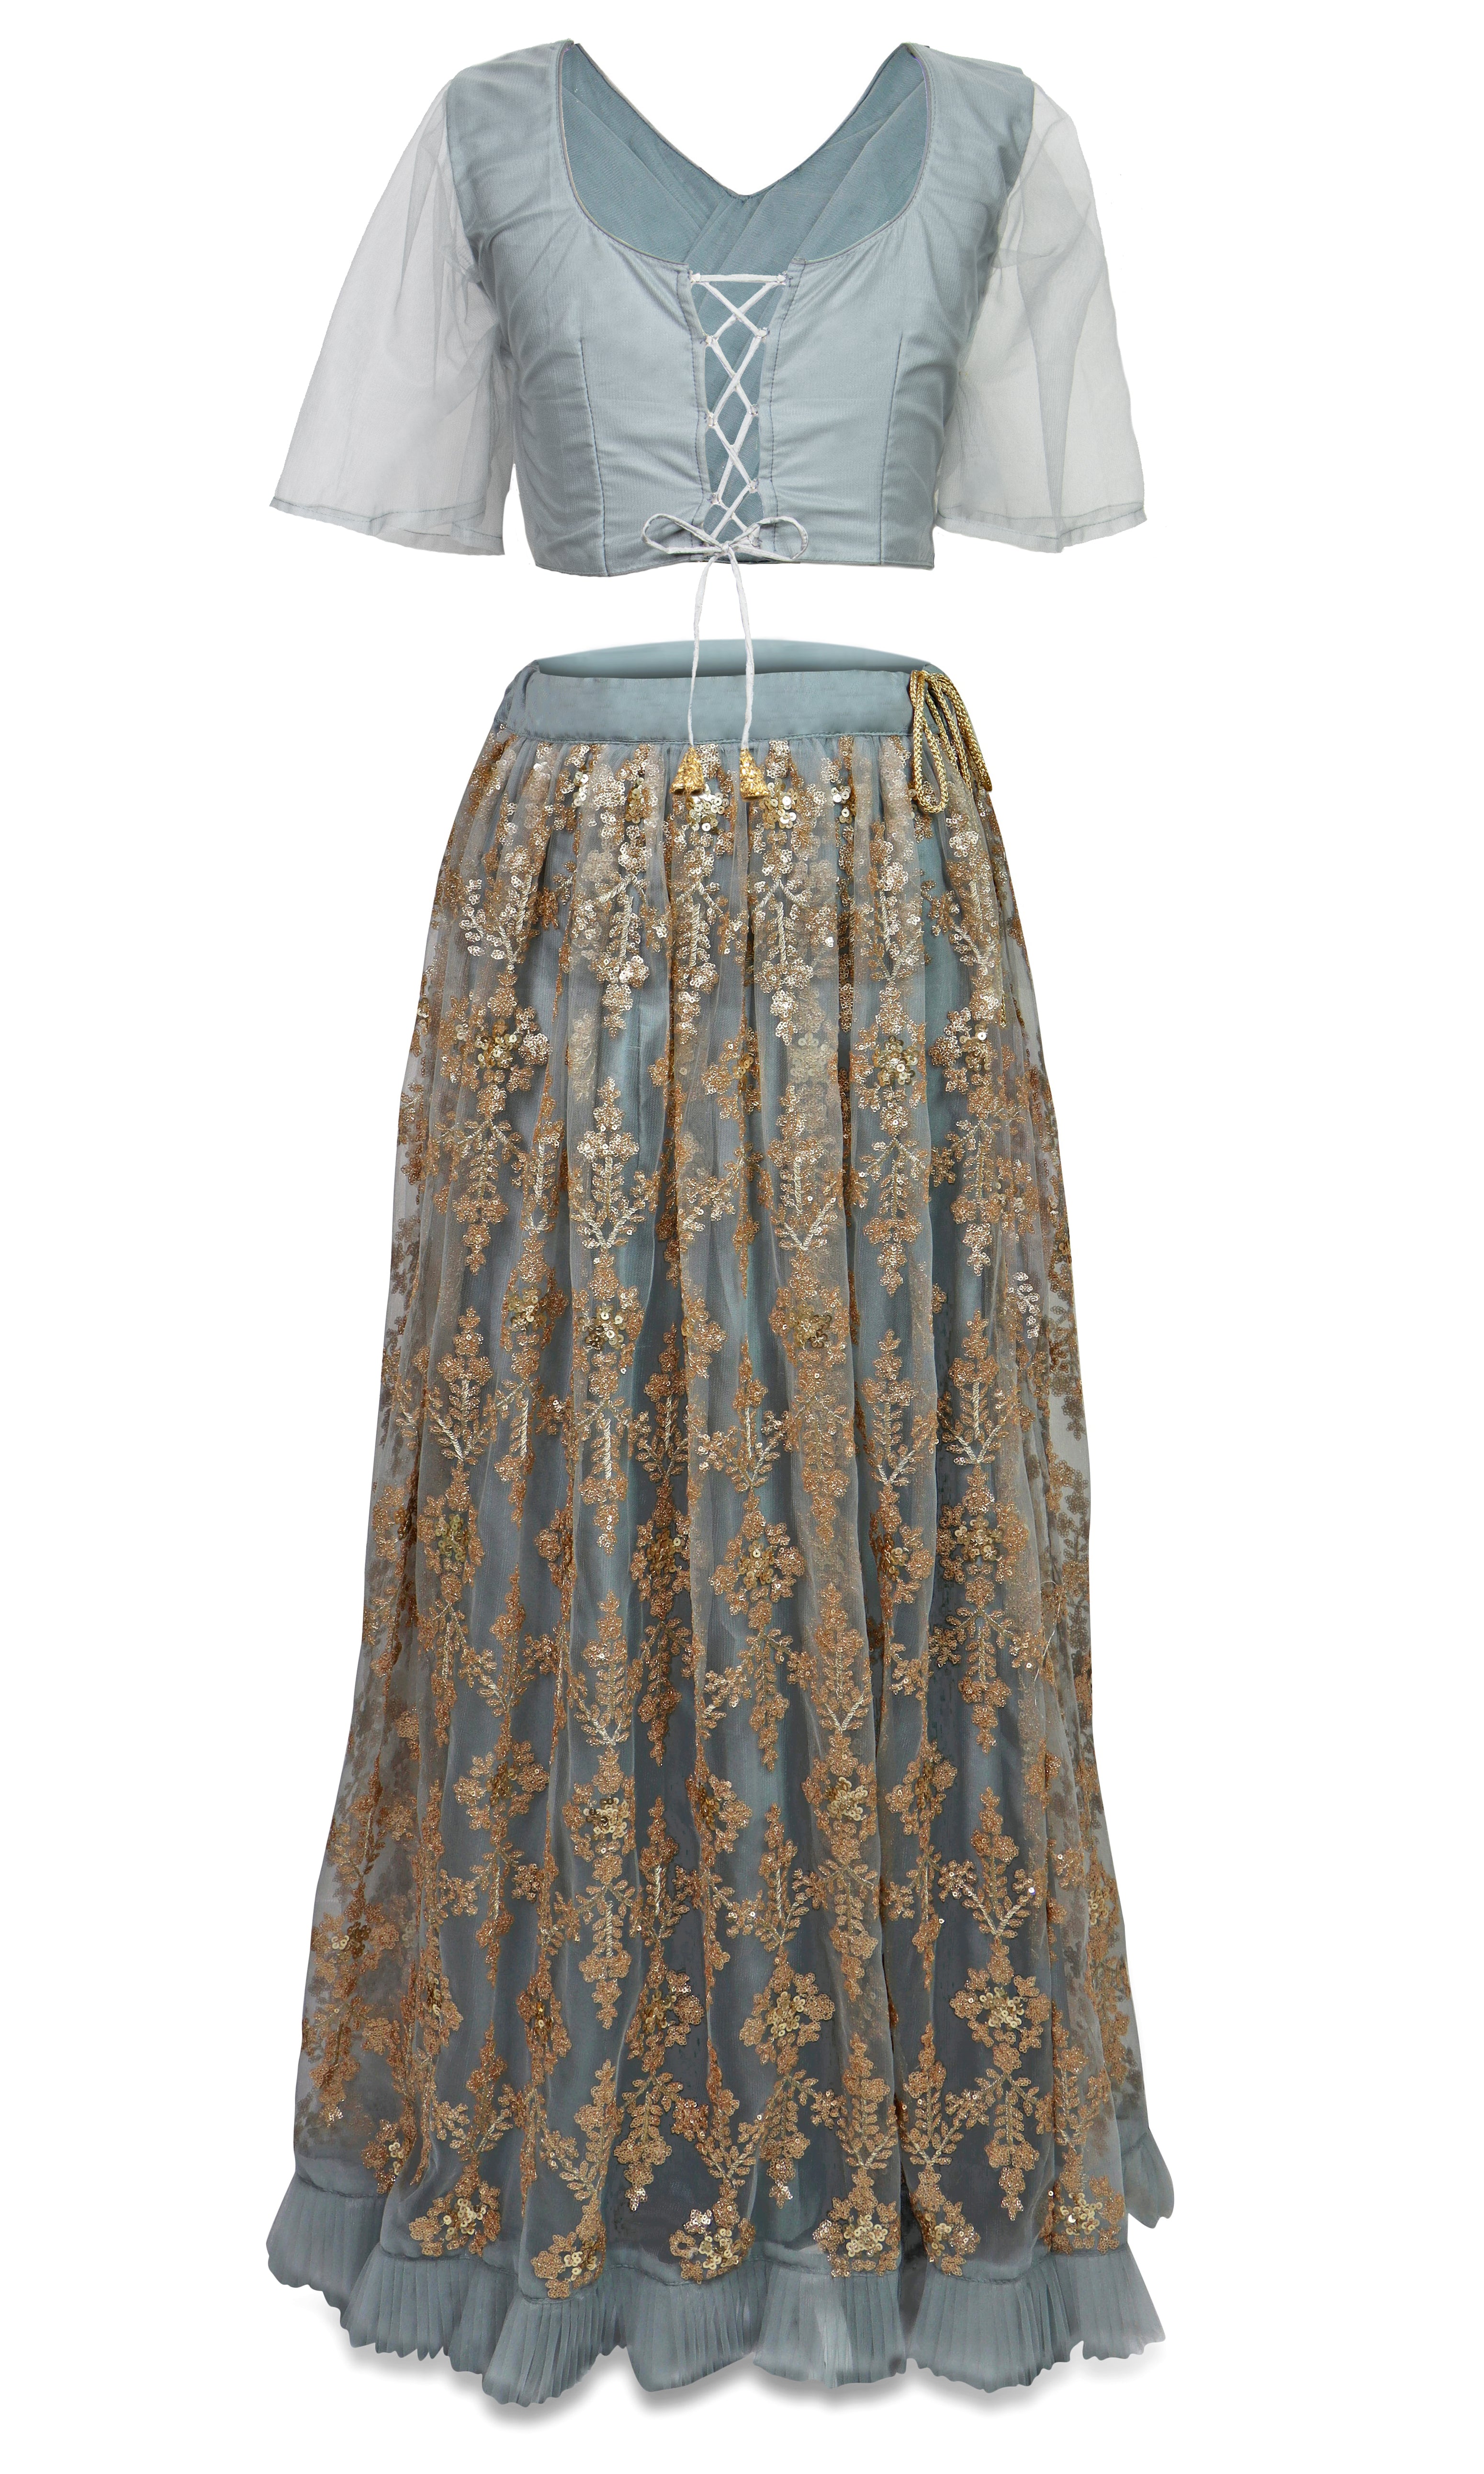 Dusty blue/light gray lehenga fully embroidered in gold sequin comes with dupatta 